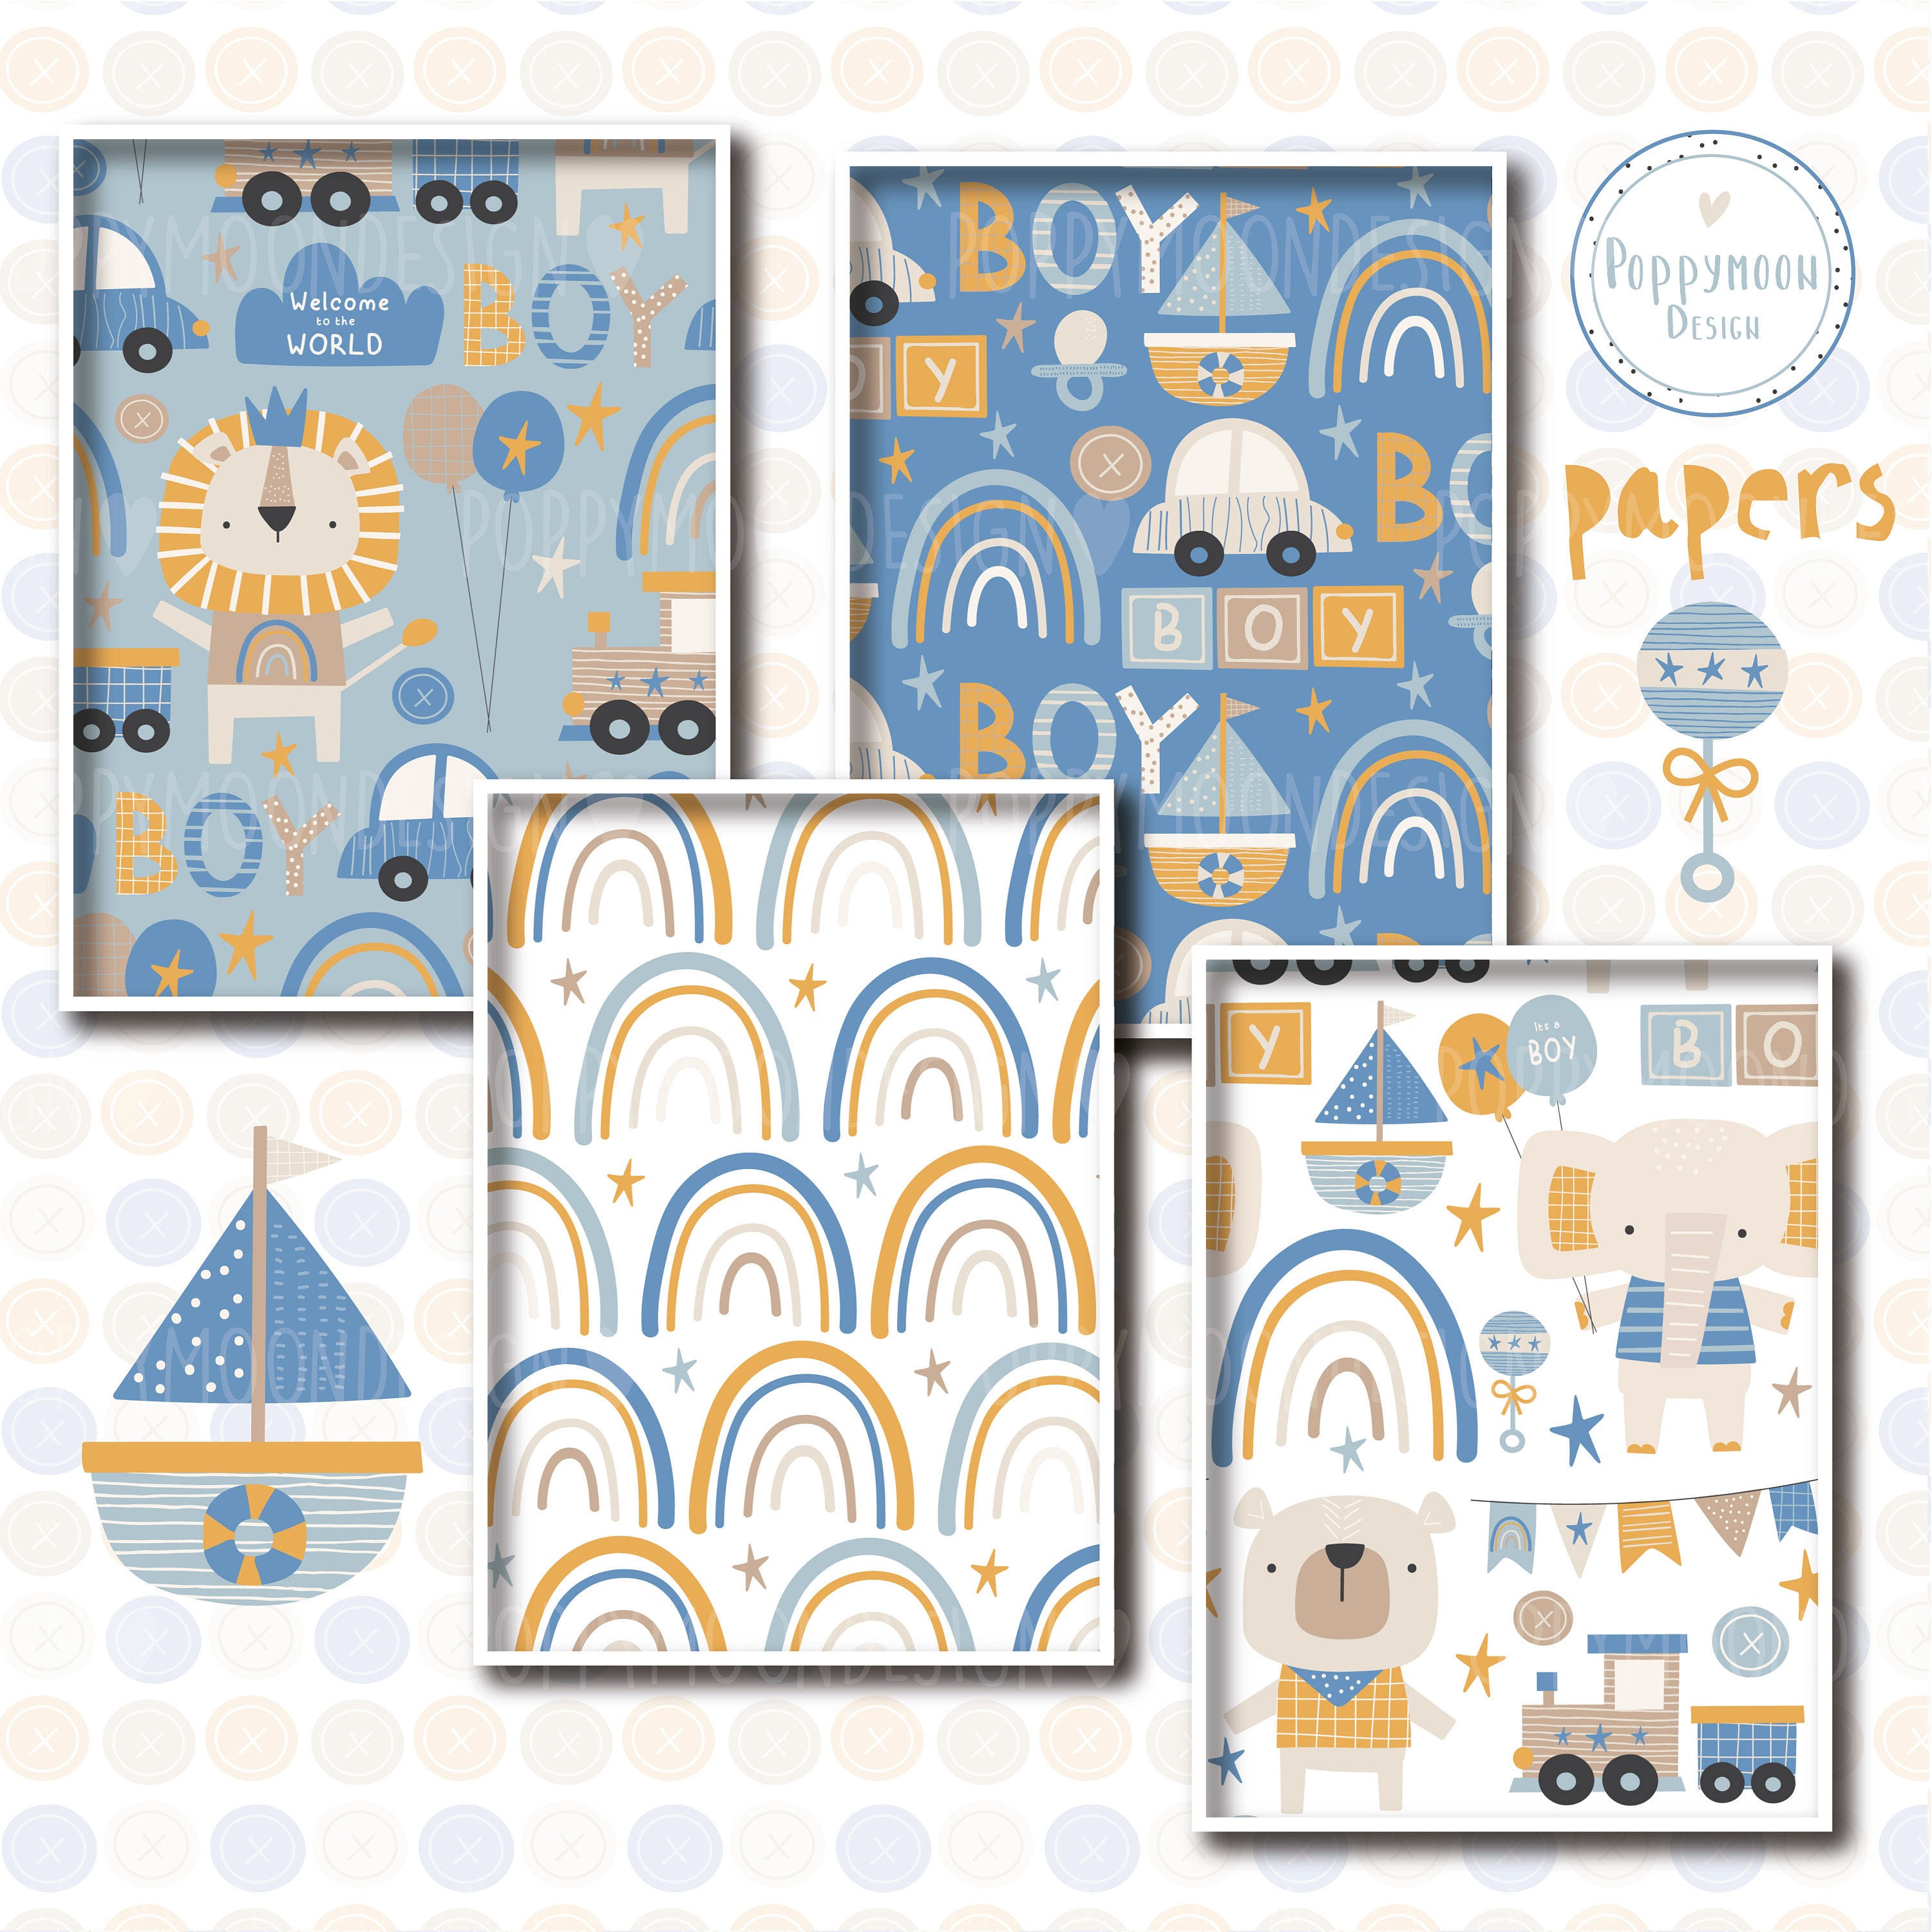 Baby Boy Scrapbook Paper: Pattern Paper Double Sided 8.5x8.5 Decorative  Paper for It's a Boy Card Making, Art Craft Projects and Baby Boy Scrapbook